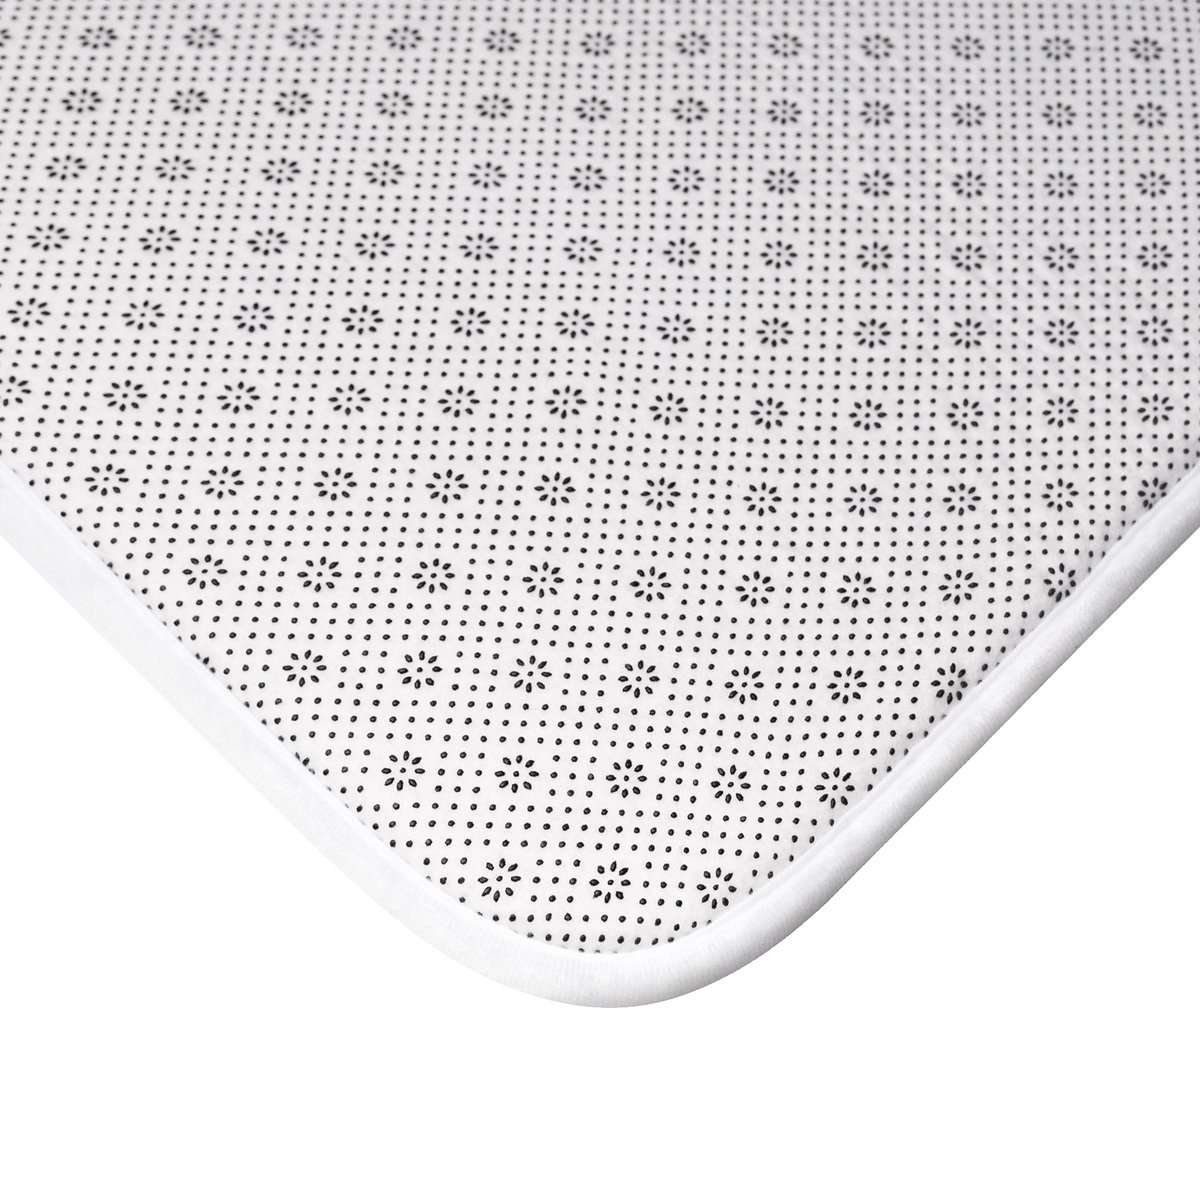 where-you-can-buy-all-your-openness-bath-mat-online-hot-sale_5.jpg